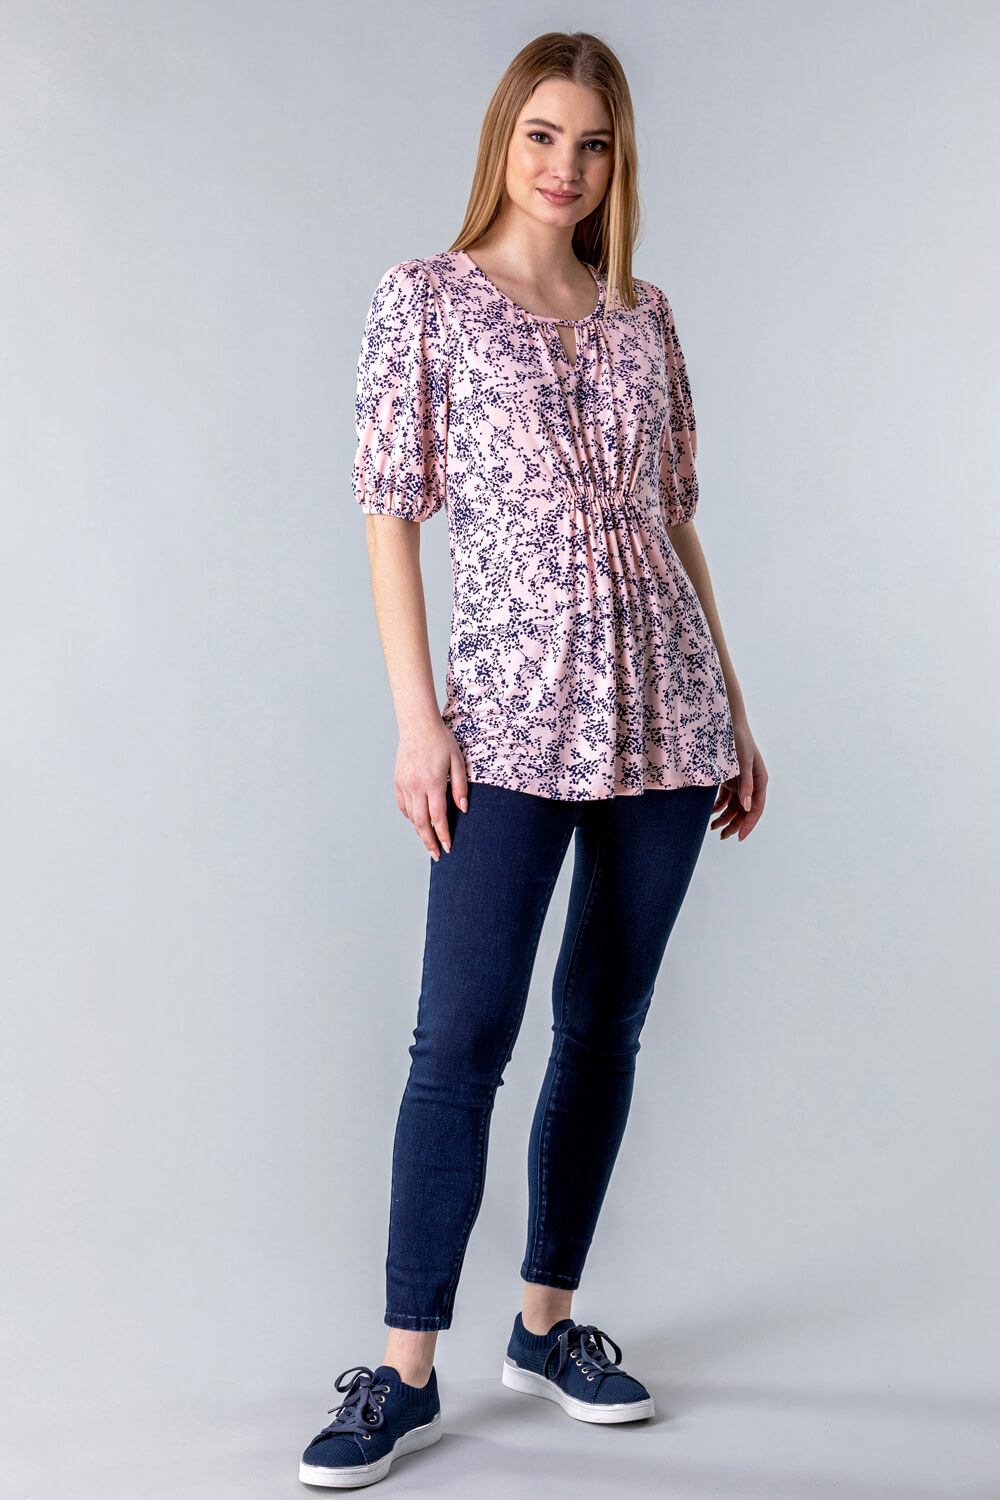 Light Pink Ruched Key Hole Neck Floral Top, Image 3 of 4